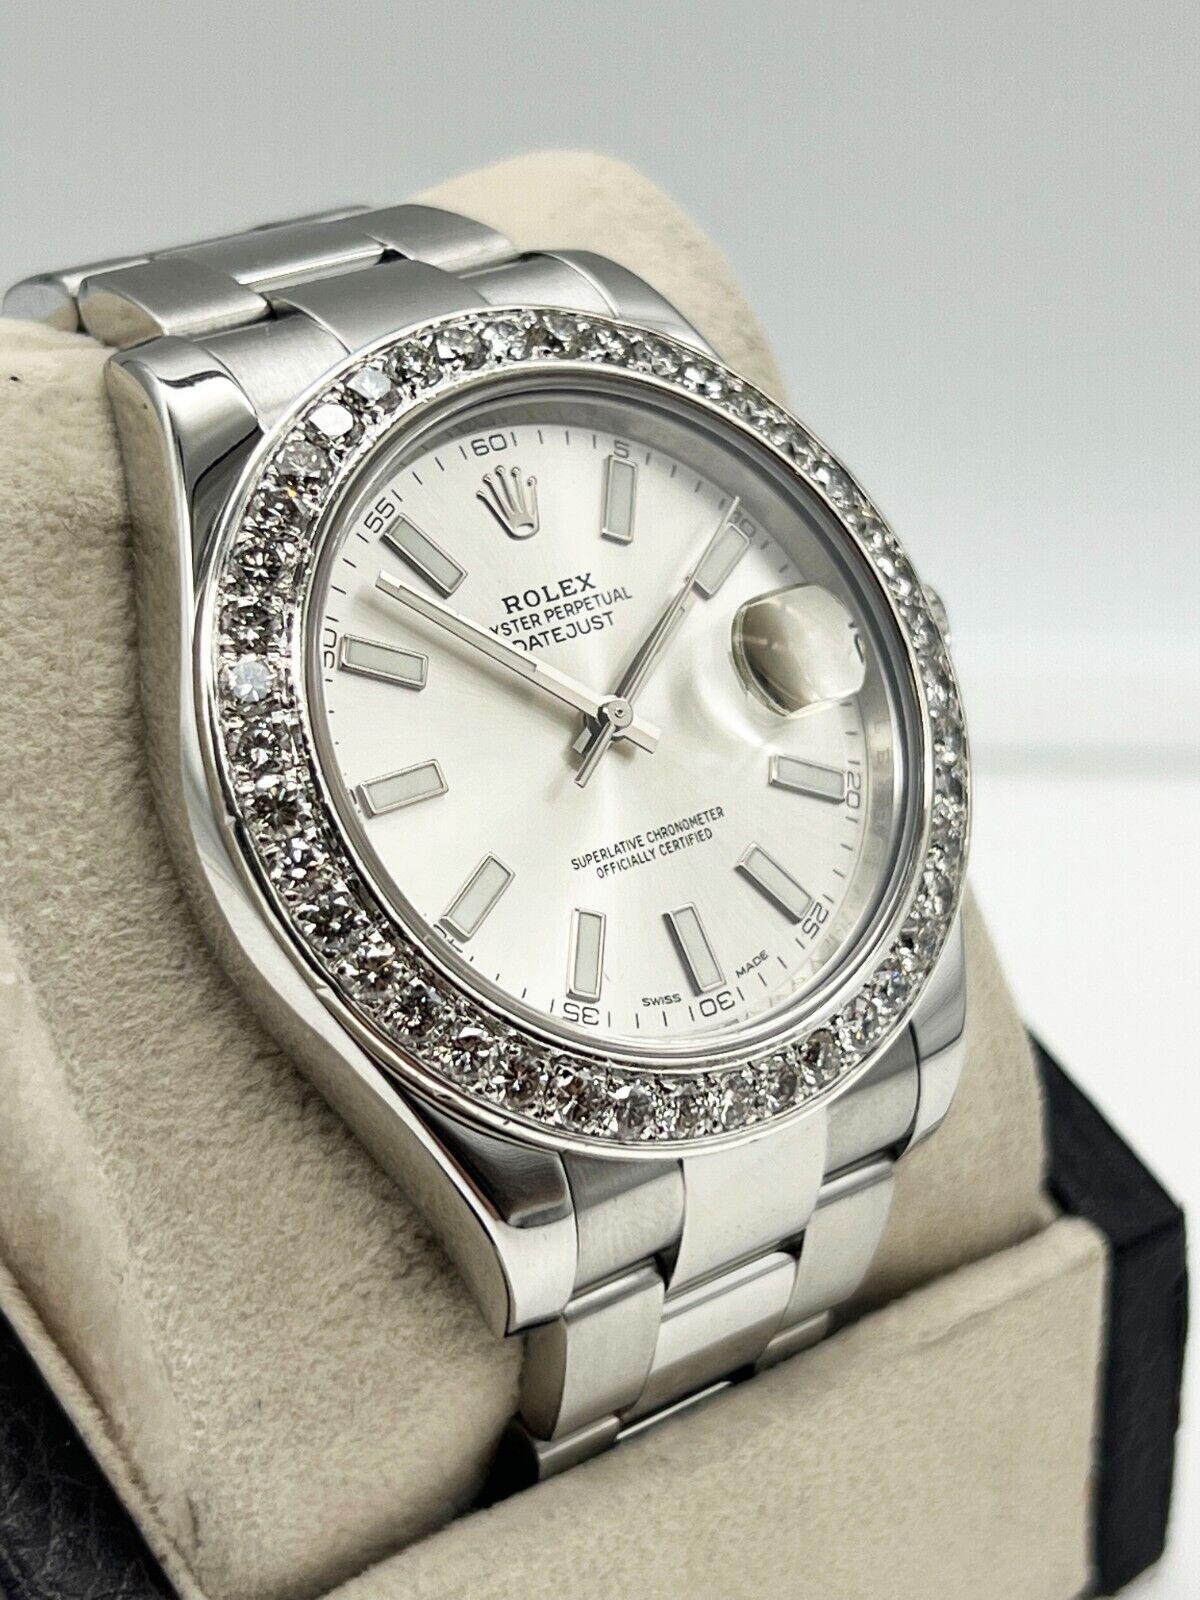 Style Number: 116300

Serial: Y0K74***

Year: 2010-Now

Model: Datejust 41

Case Material: Stainless Steel 

Band: Stainless Steel 

Bezel: Custom Diamond Bezel 

Dial: Silver Dial 

Face: Sapphire Crystal 

Case Size: 41mm 

Includes: 

-Elegant